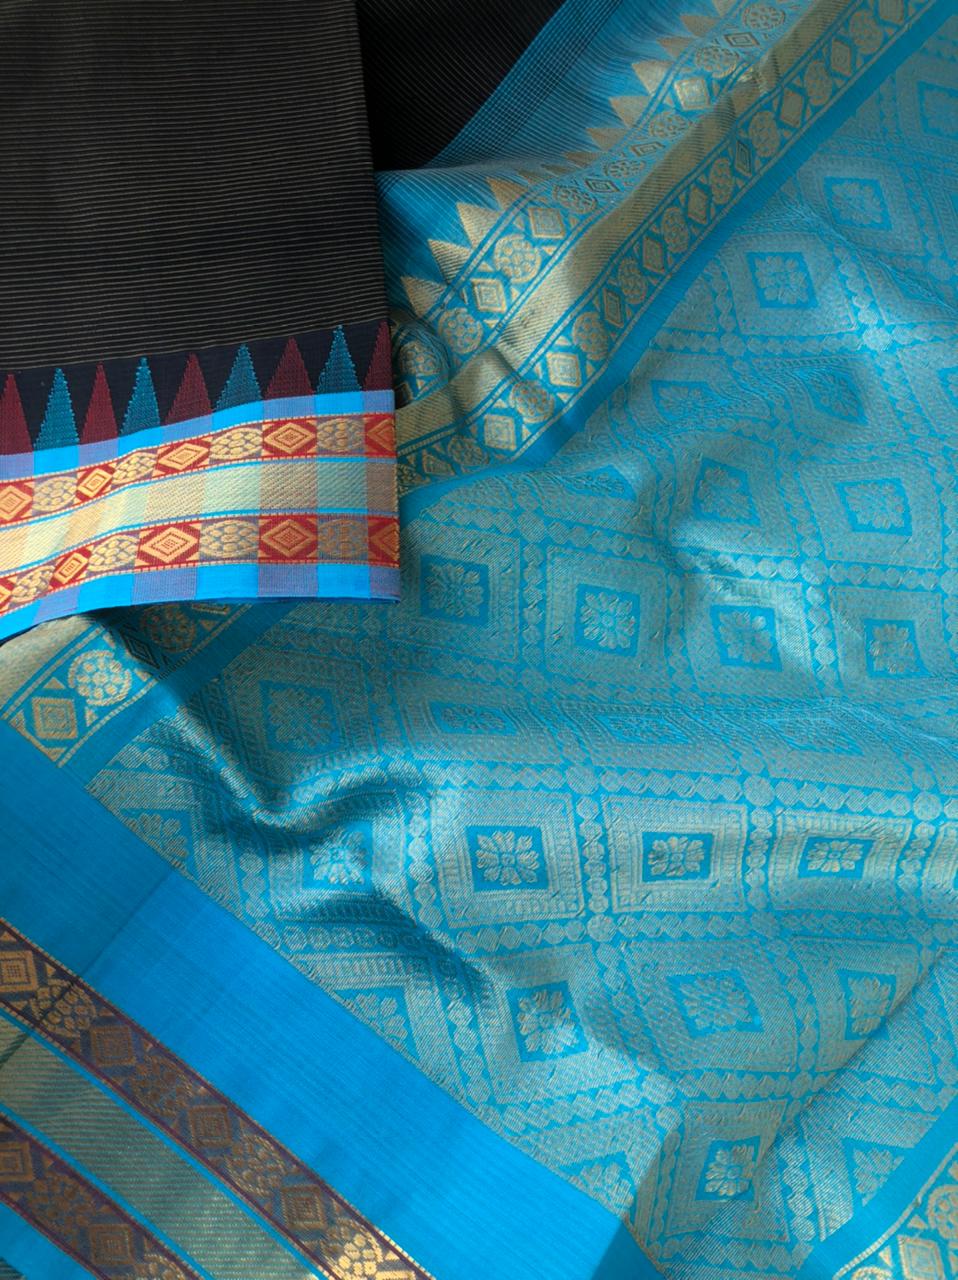 Best of Korvai Silk Cotton - black and blue Vairaoosi silk cotton with chex woven borders